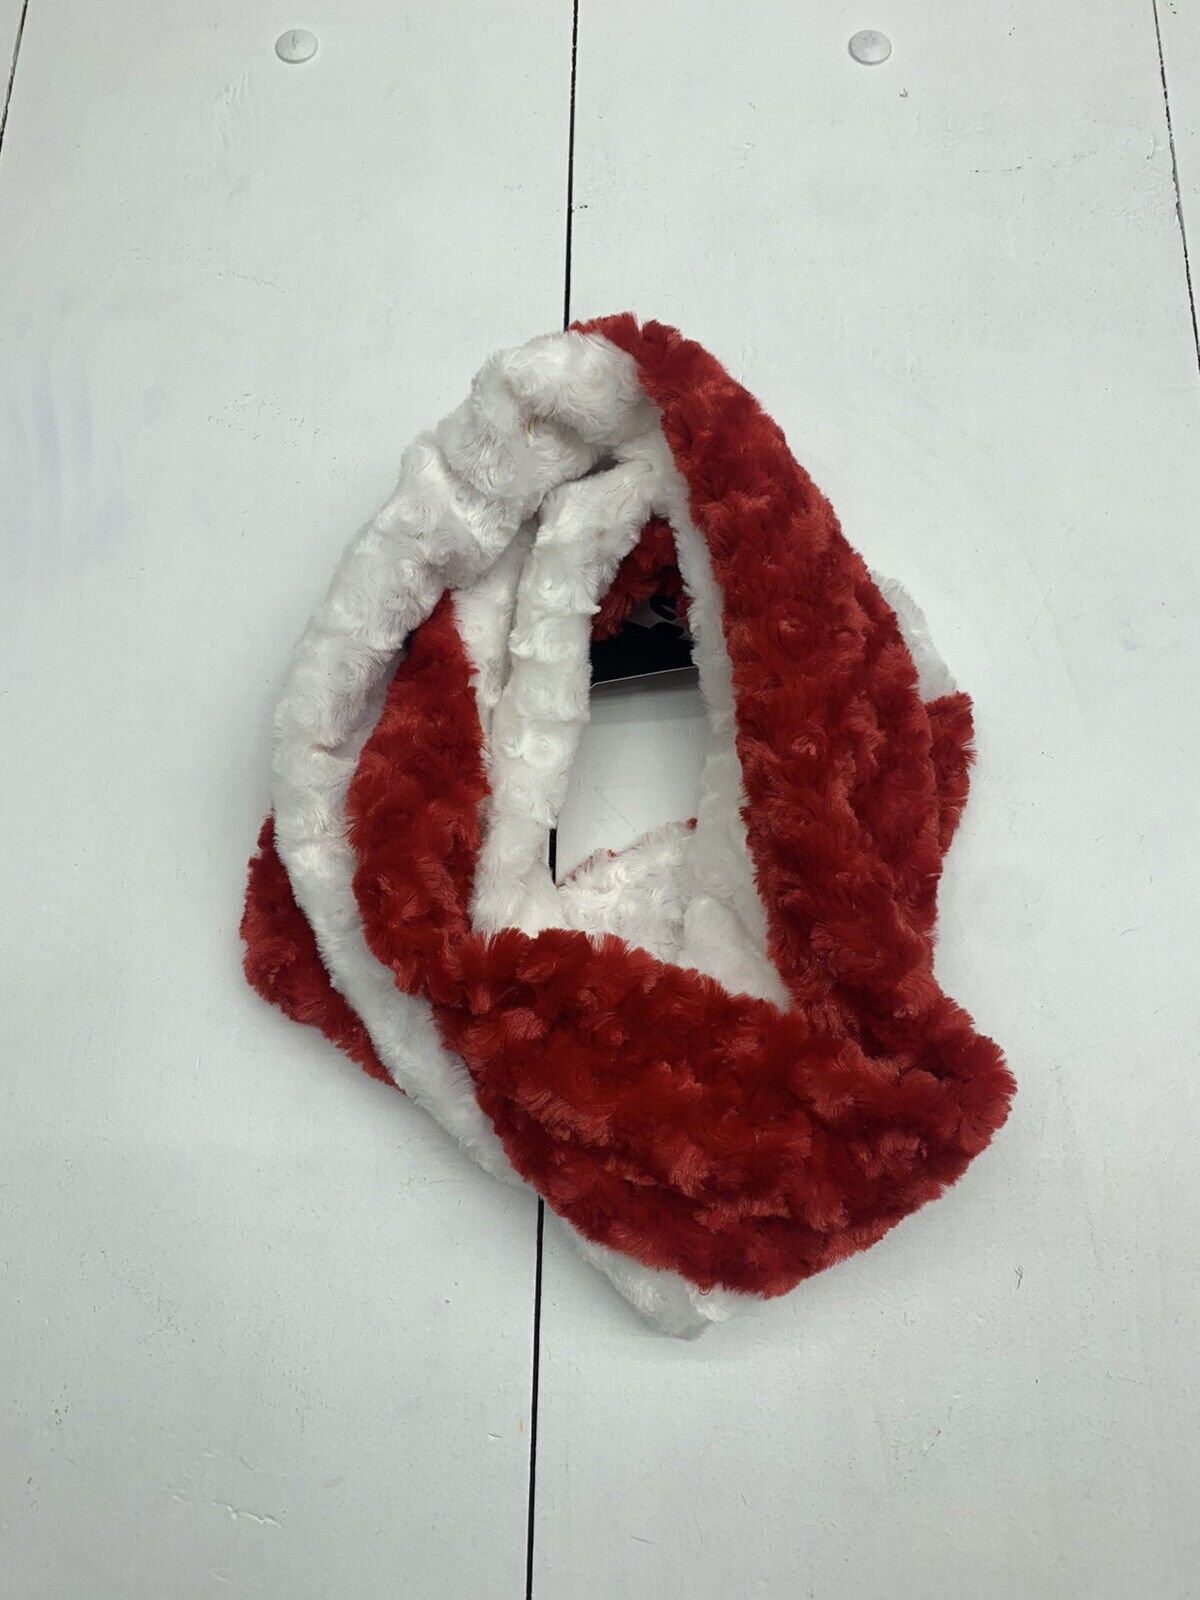 Spirittales Red White Infinity Scarf Size Large